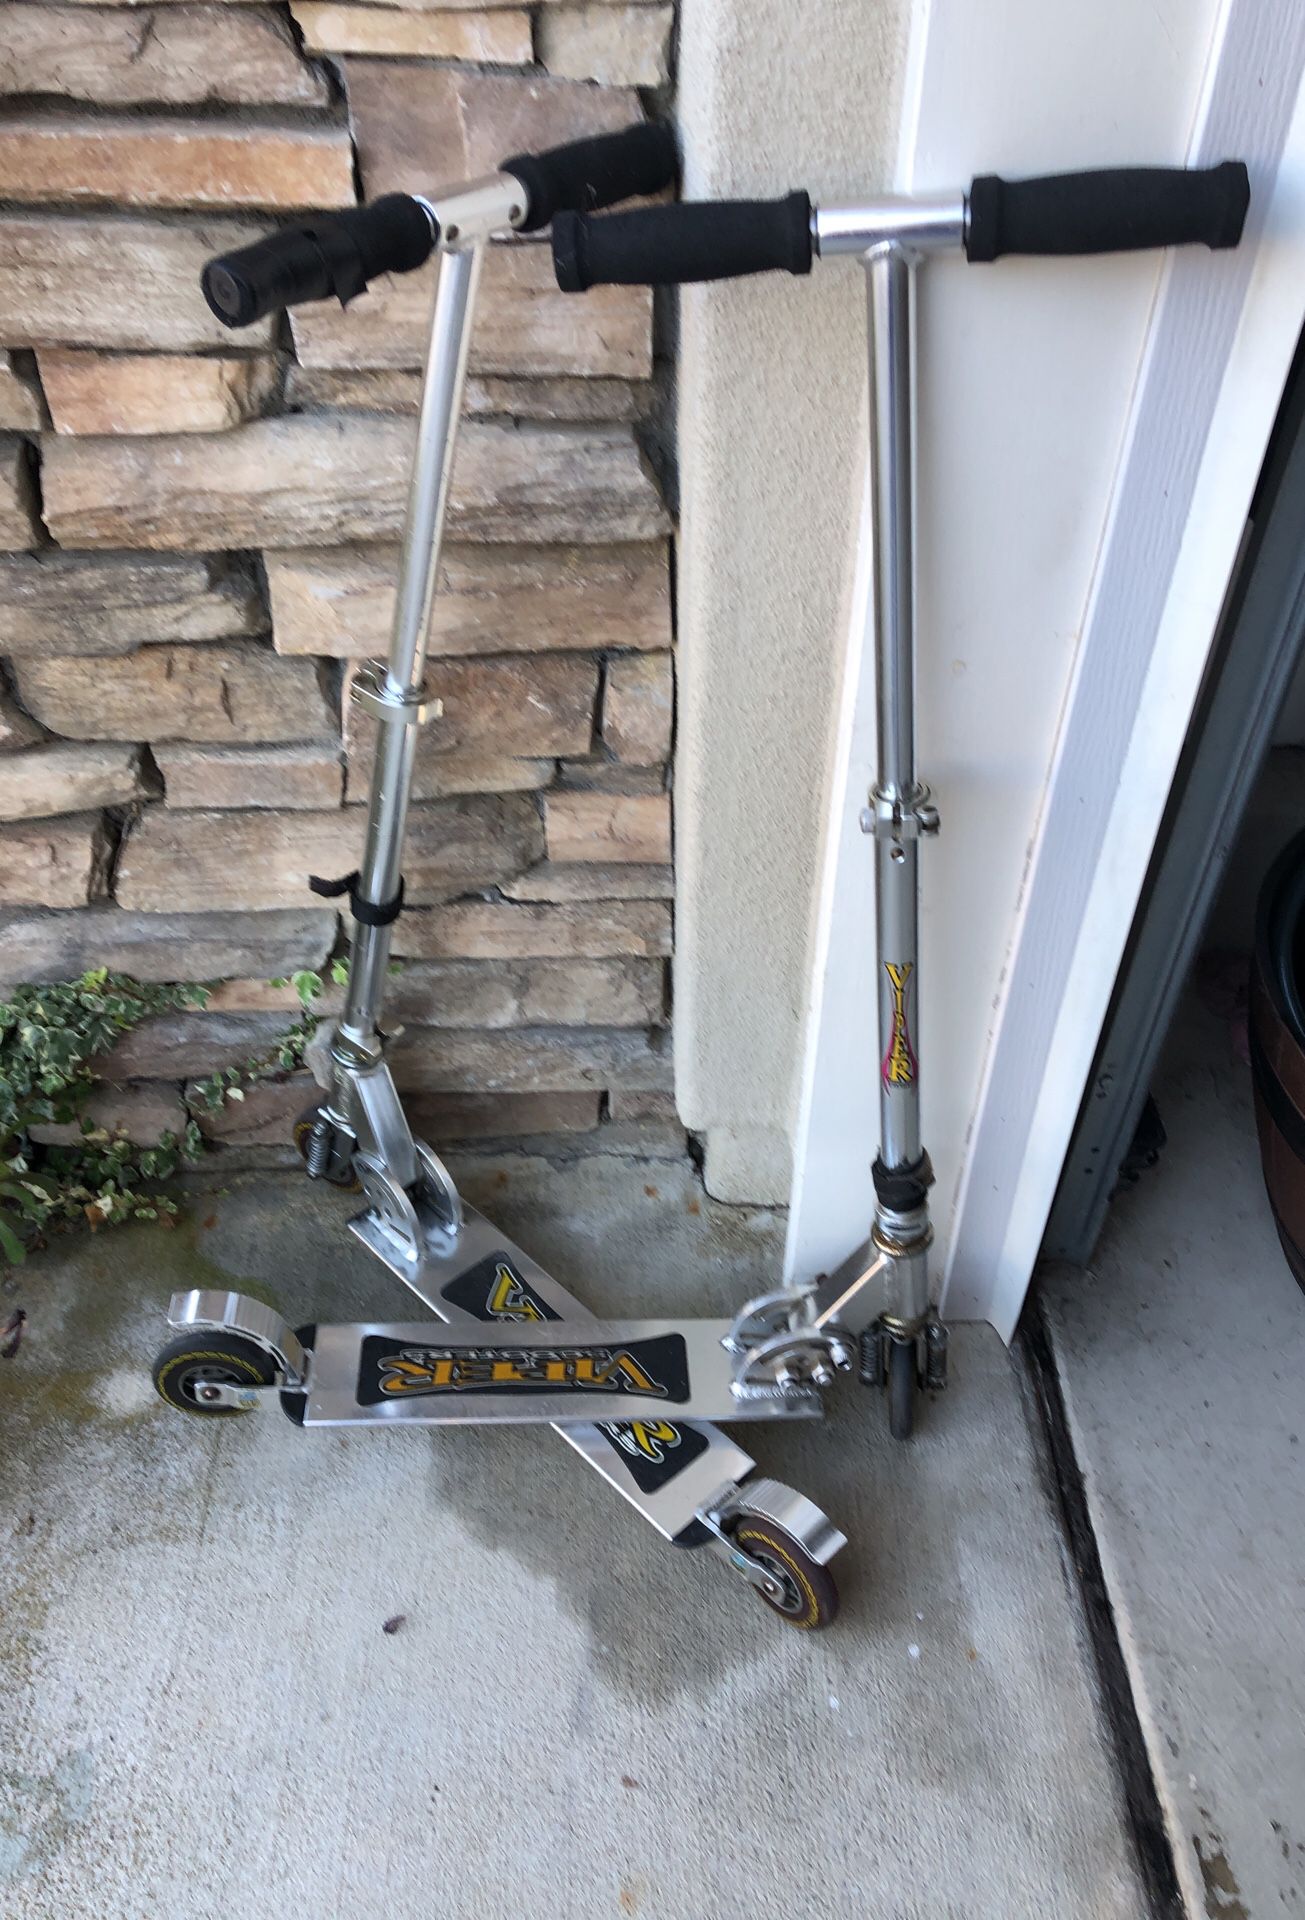 Viper Scooters $20 each / both for $35